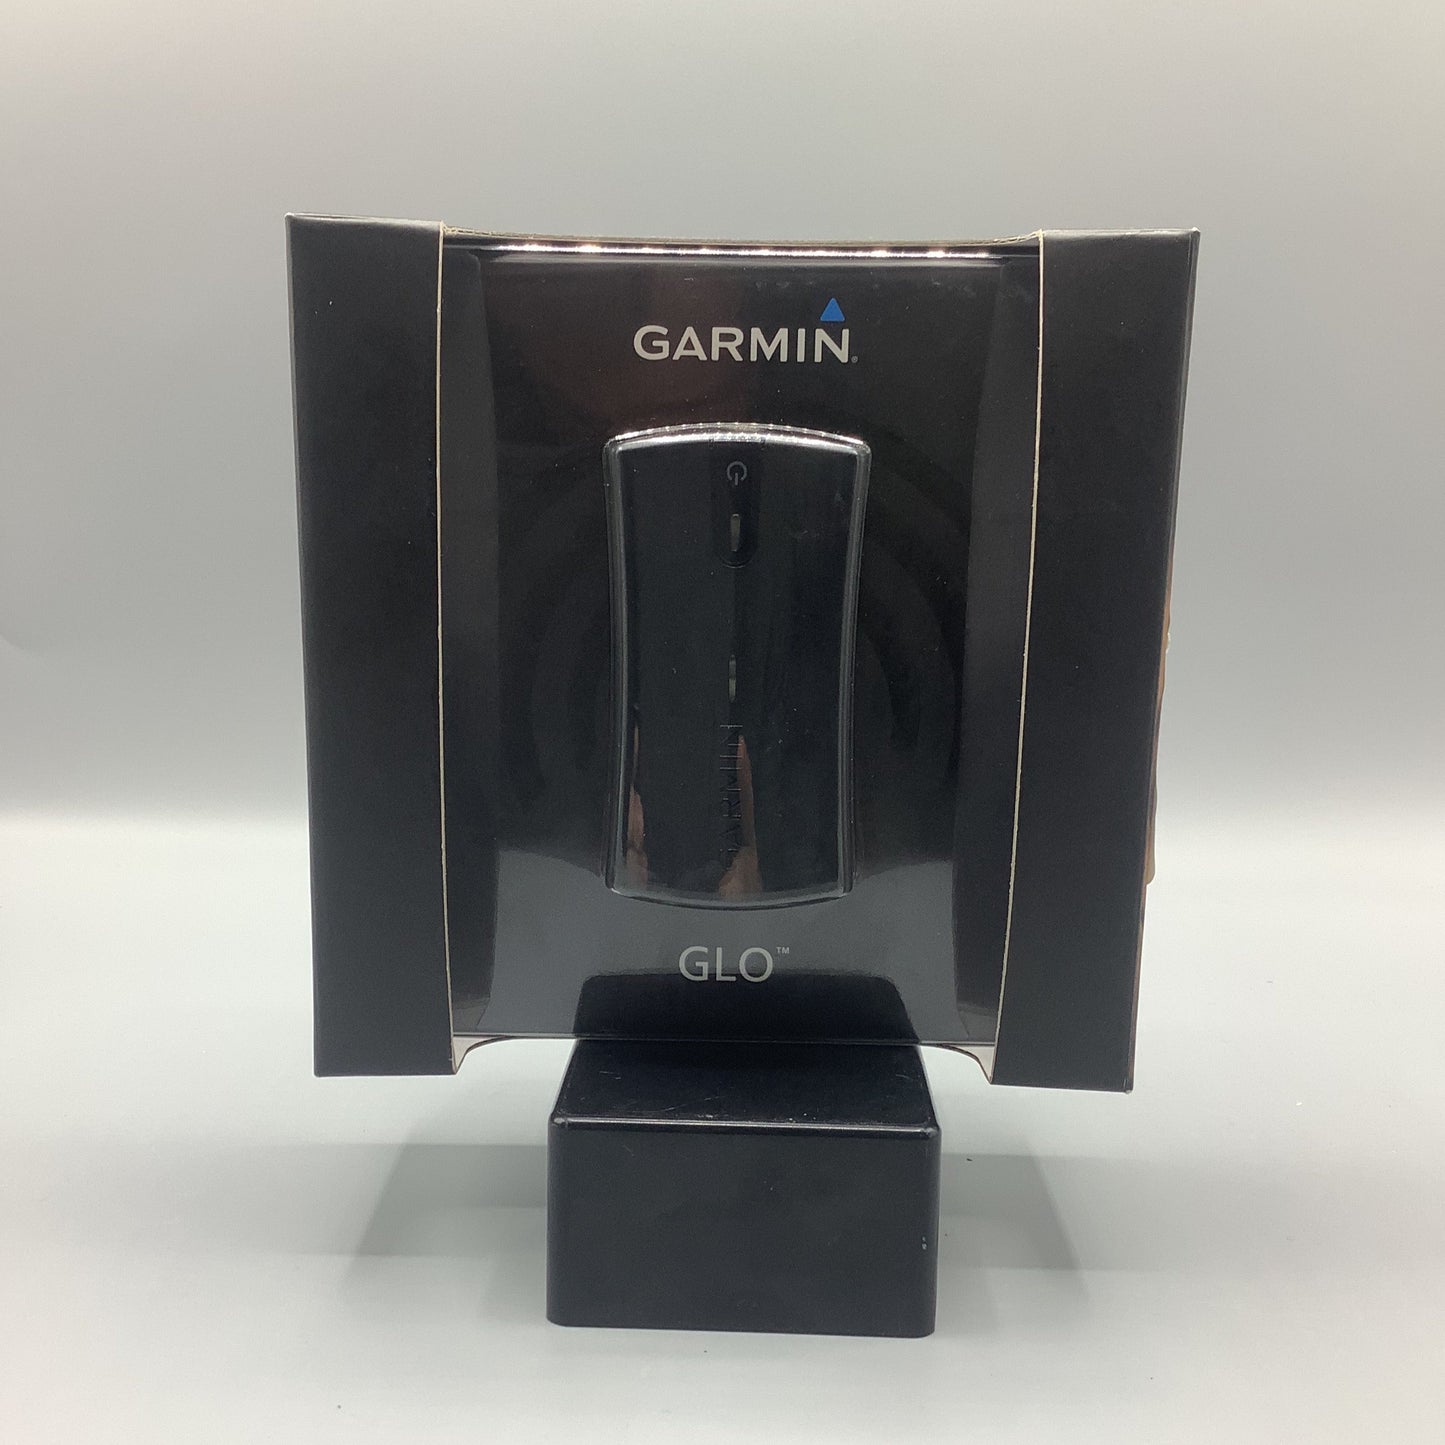 Garmin Glo for Aviation - Part Number: 010-01055-00